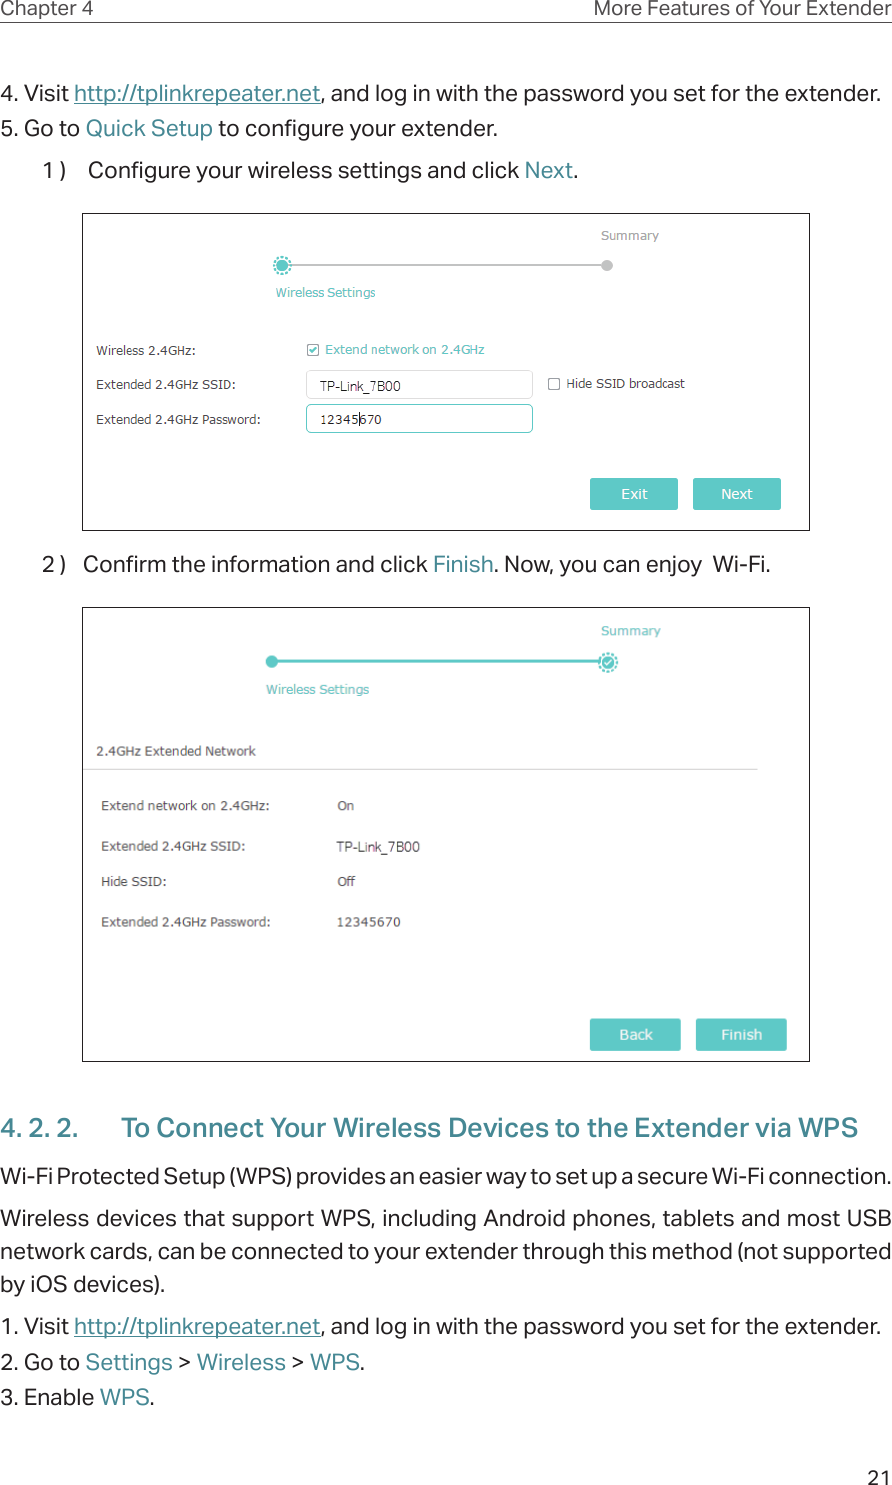 21Chapter 4 More Features of Your Extender4. Visit http://tplinkrepeater.net, and log in with the password you set for the extender.5. Go to Quick Setup to configure your extender.1 )   Configure your wireless settings and click Next.  2 )  Confirm the information and click Finish. Now, you can enjoy  Wi-Fi.4. 2. 2.  To Connect Your Wireless Devices to the Extender via WPSWi-Fi Protected Setup (WPS) provides an easier way to set up a secure Wi-Fi connection.Wireless devices that support WPS, including Android phones, tablets and most USB network cards, can be connected to your extender through this method (not supported by iOS devices).1. Visit http://tplinkrepeater.net, and log in with the password you set for the extender.2. Go to Settings &gt; Wireless &gt; WPS. 3. Enable WPS.